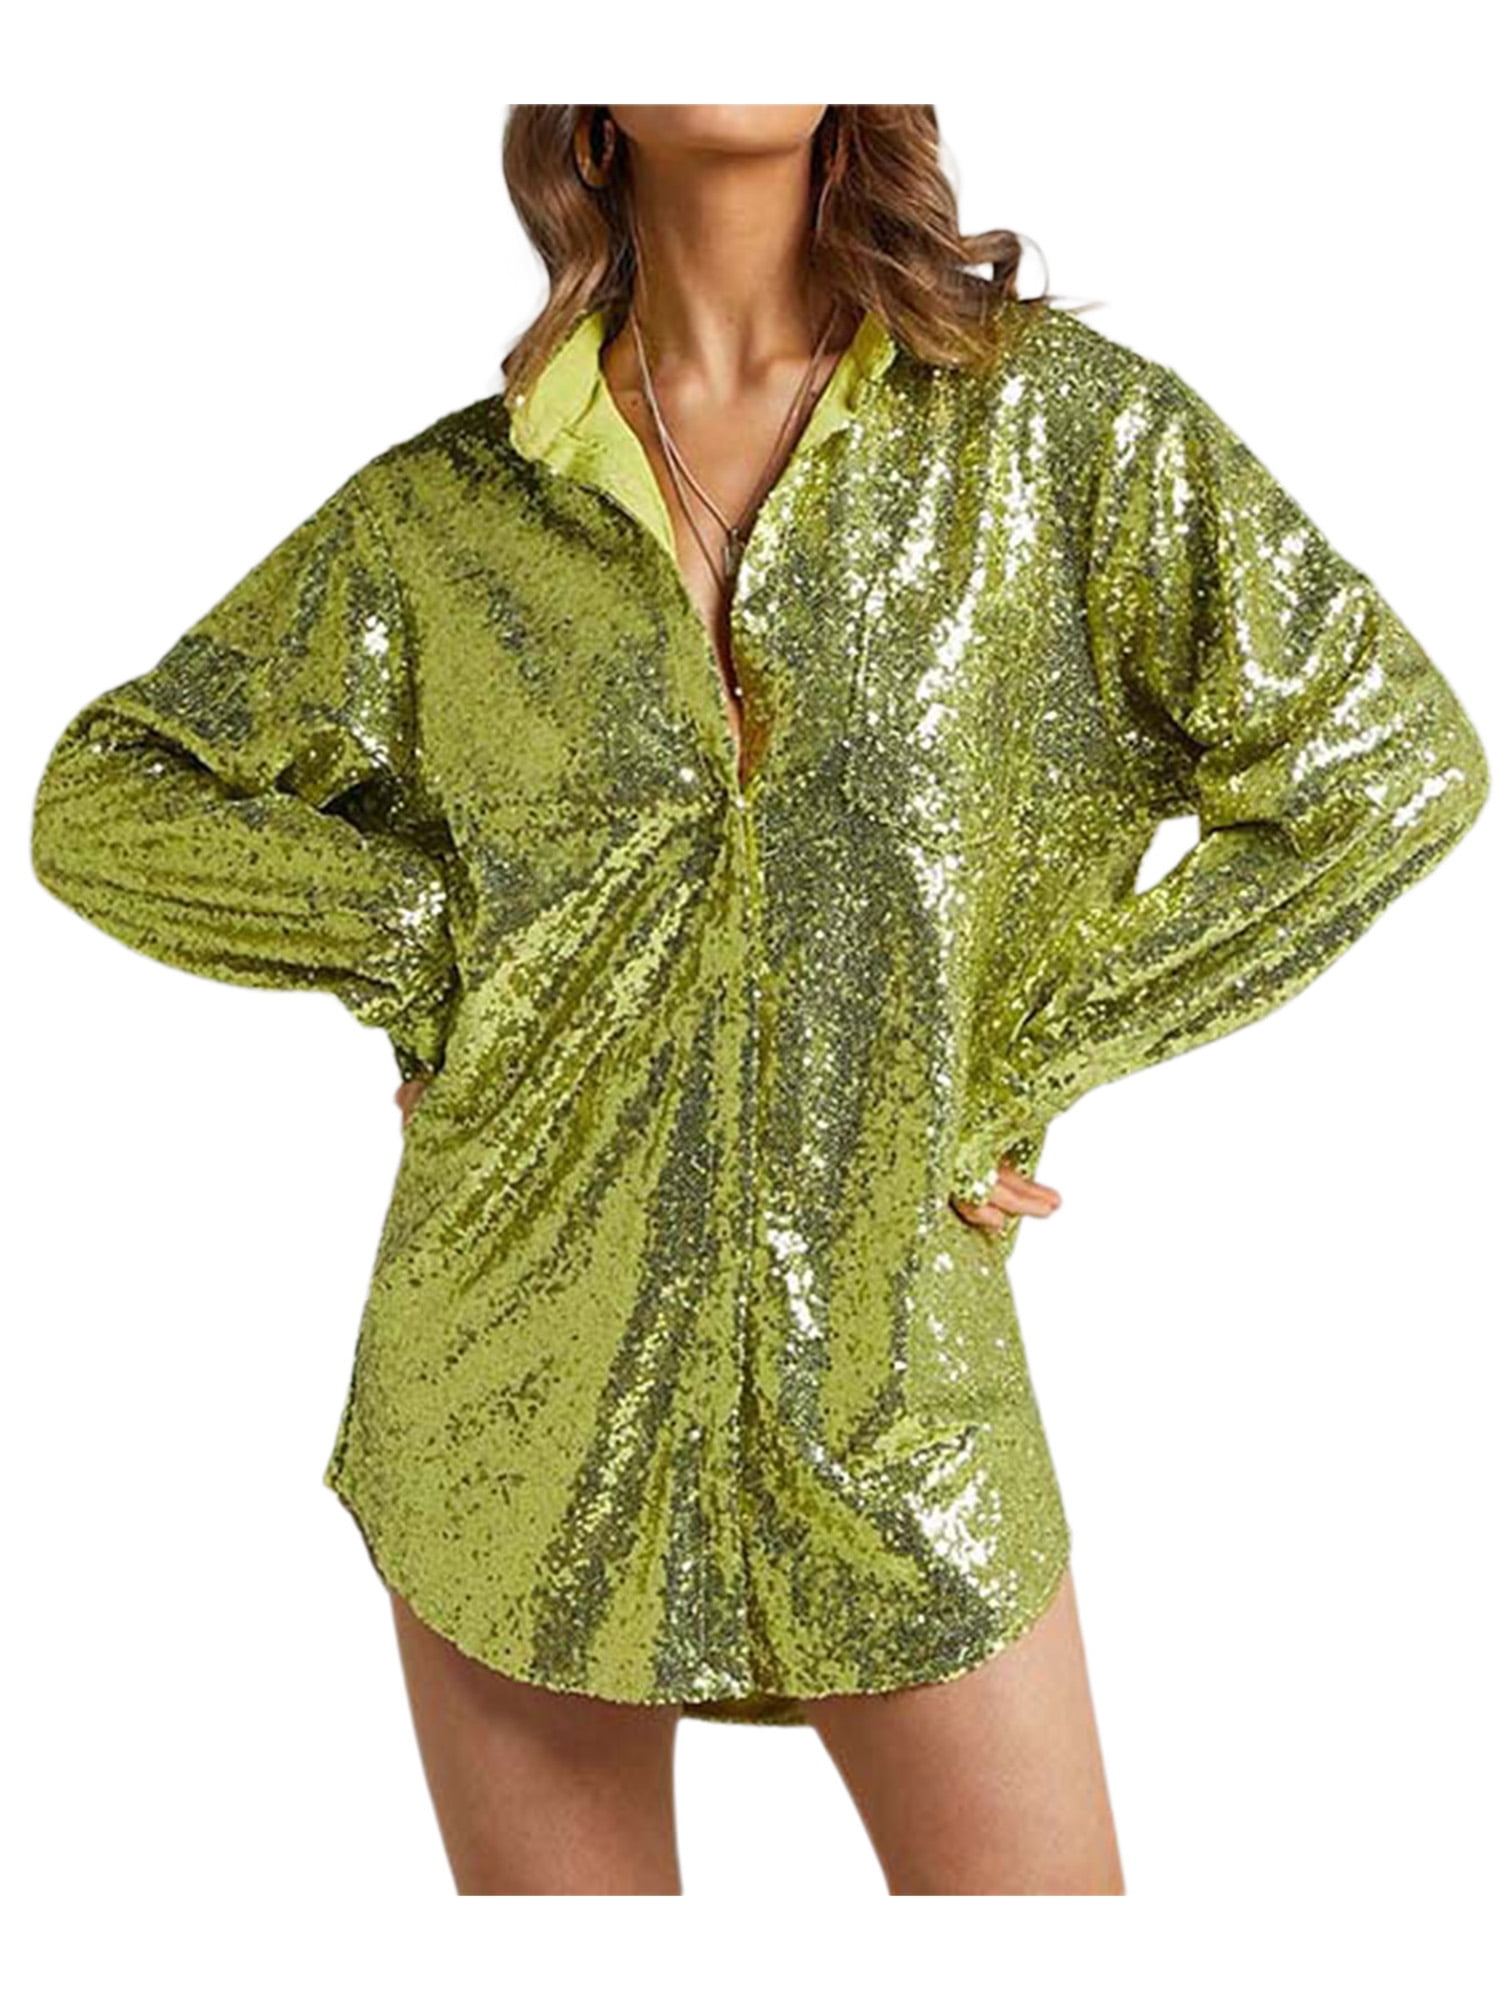 GIRLS MILK COLOR GAP SPARKLE SEQUINS LONG SLEEVE SHIRT GREEN ACCENT COLOR NWT 